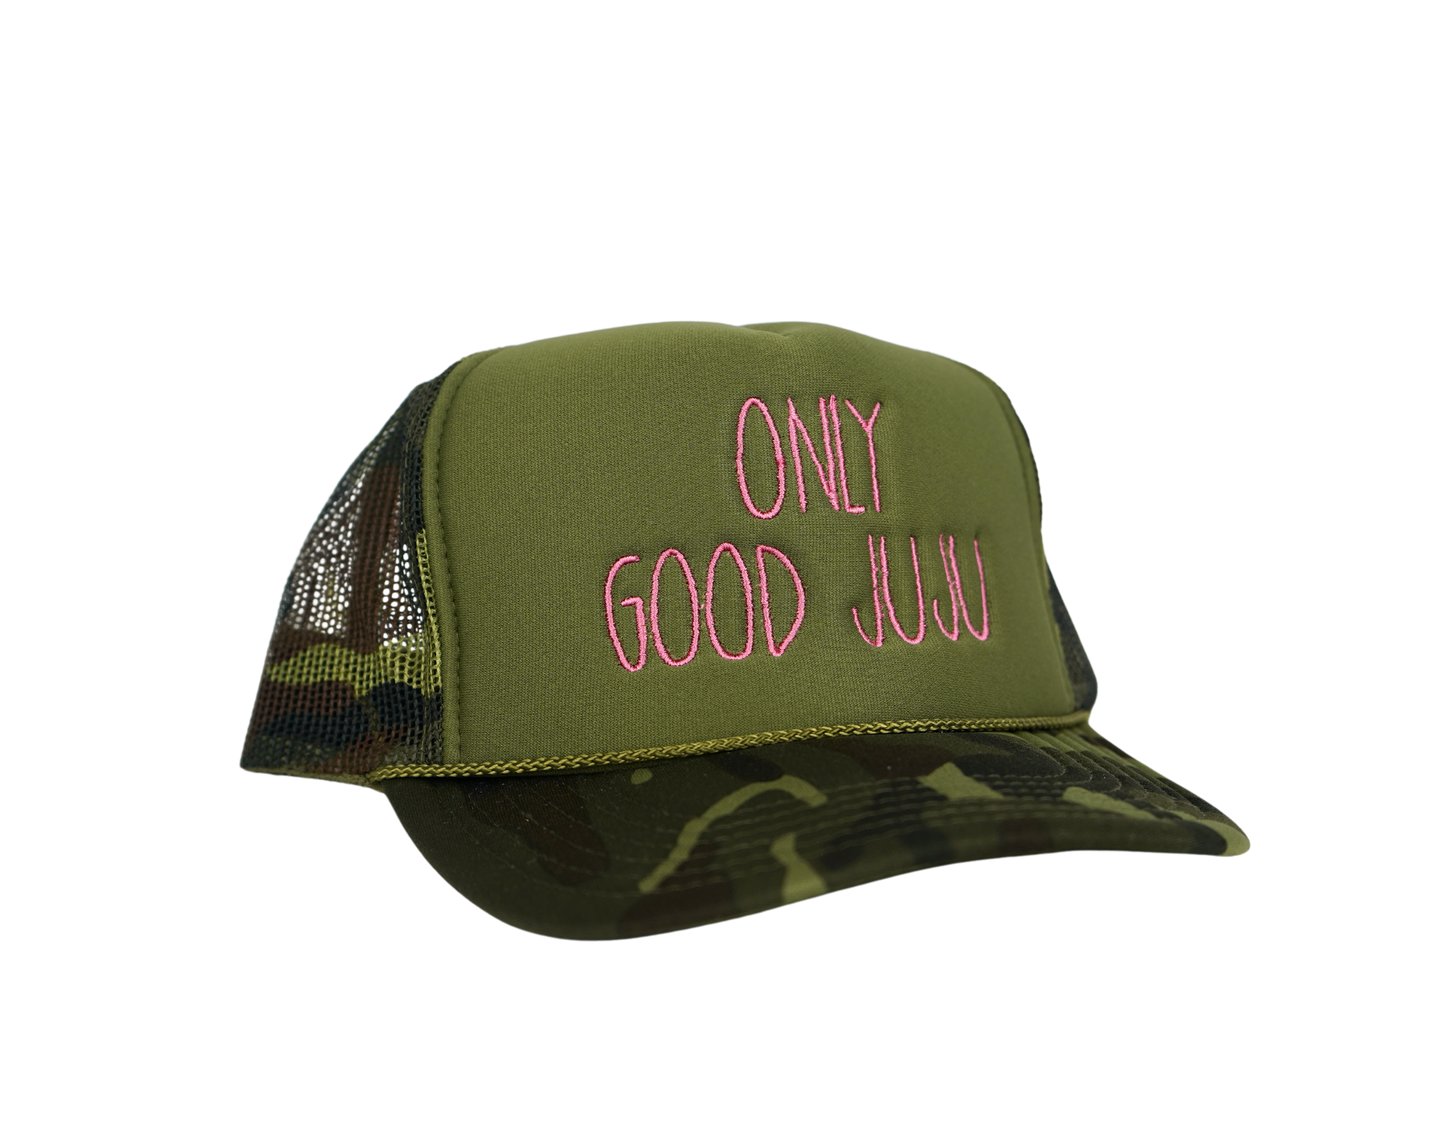 Only Good JuJu Embroidered Trucker Hat - Light Camo